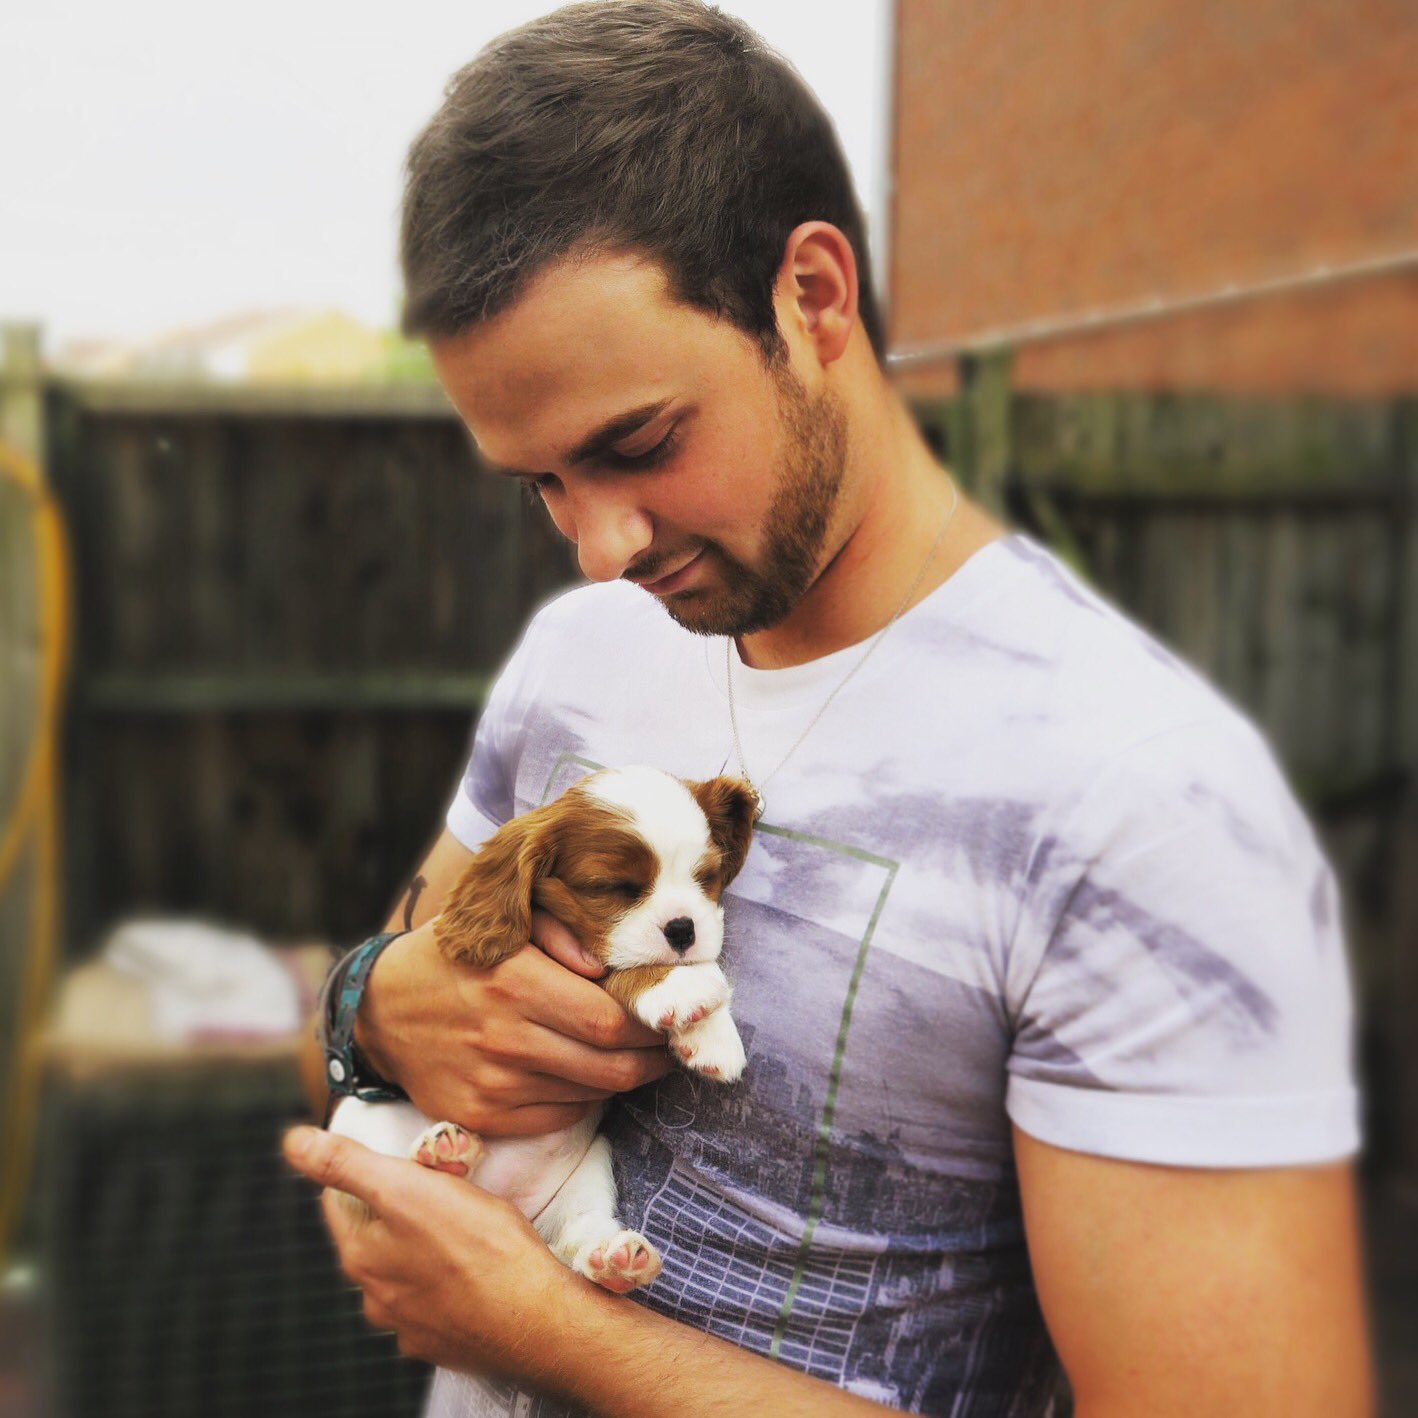 Ali-A on Twitter: "Say hello to "Eevee" our new puppy 